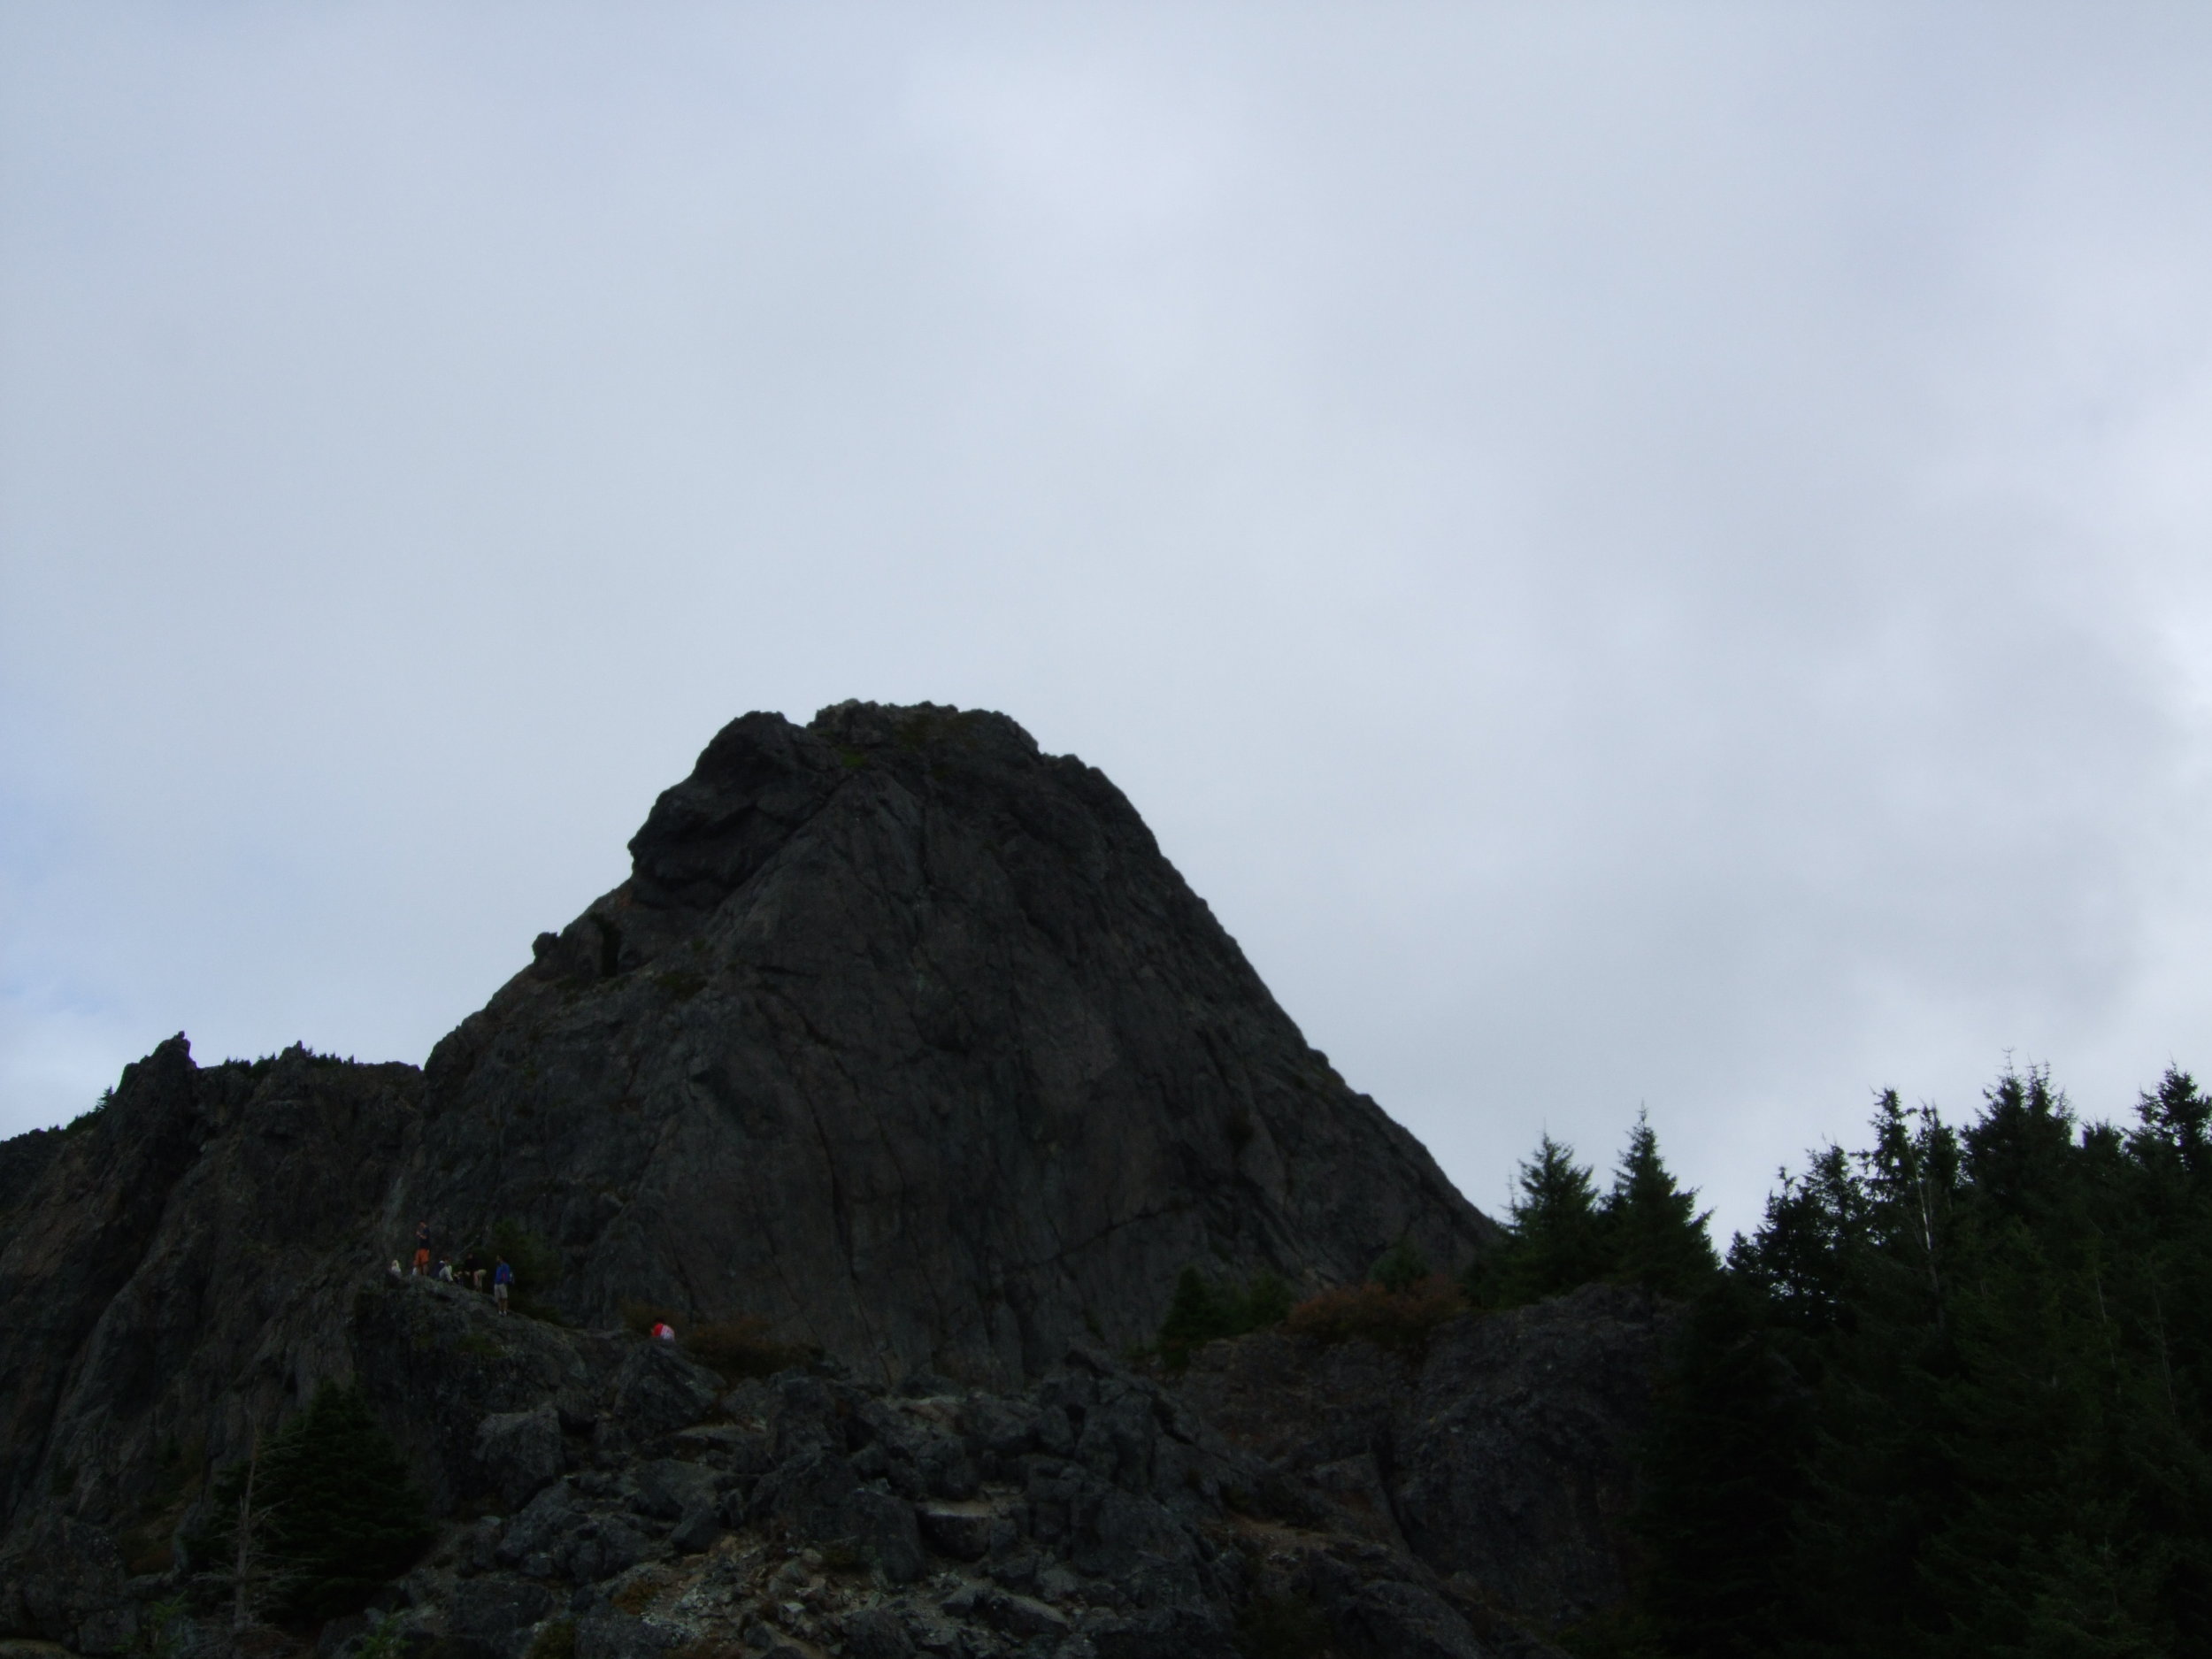  Mt. Si, August 2013 